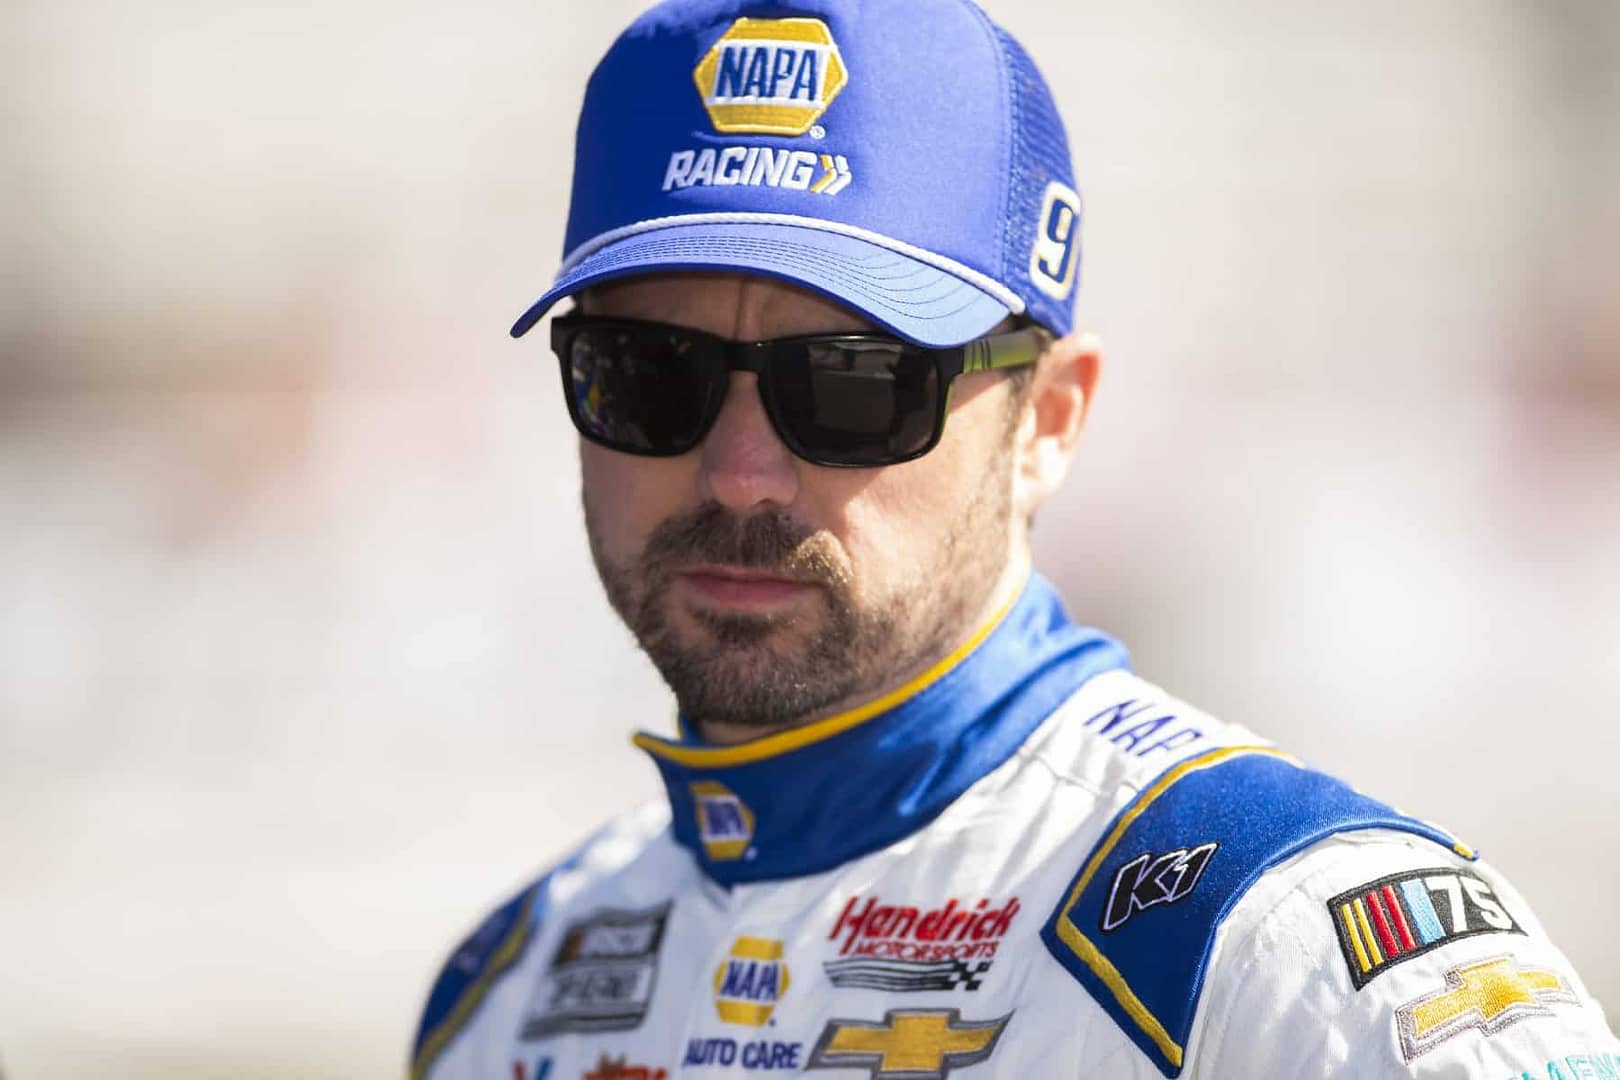 NASCAR's Wurth 400 runs on Sunday. Our expert breaks down the best NASCAR matchup and prop bets for Dover, including...